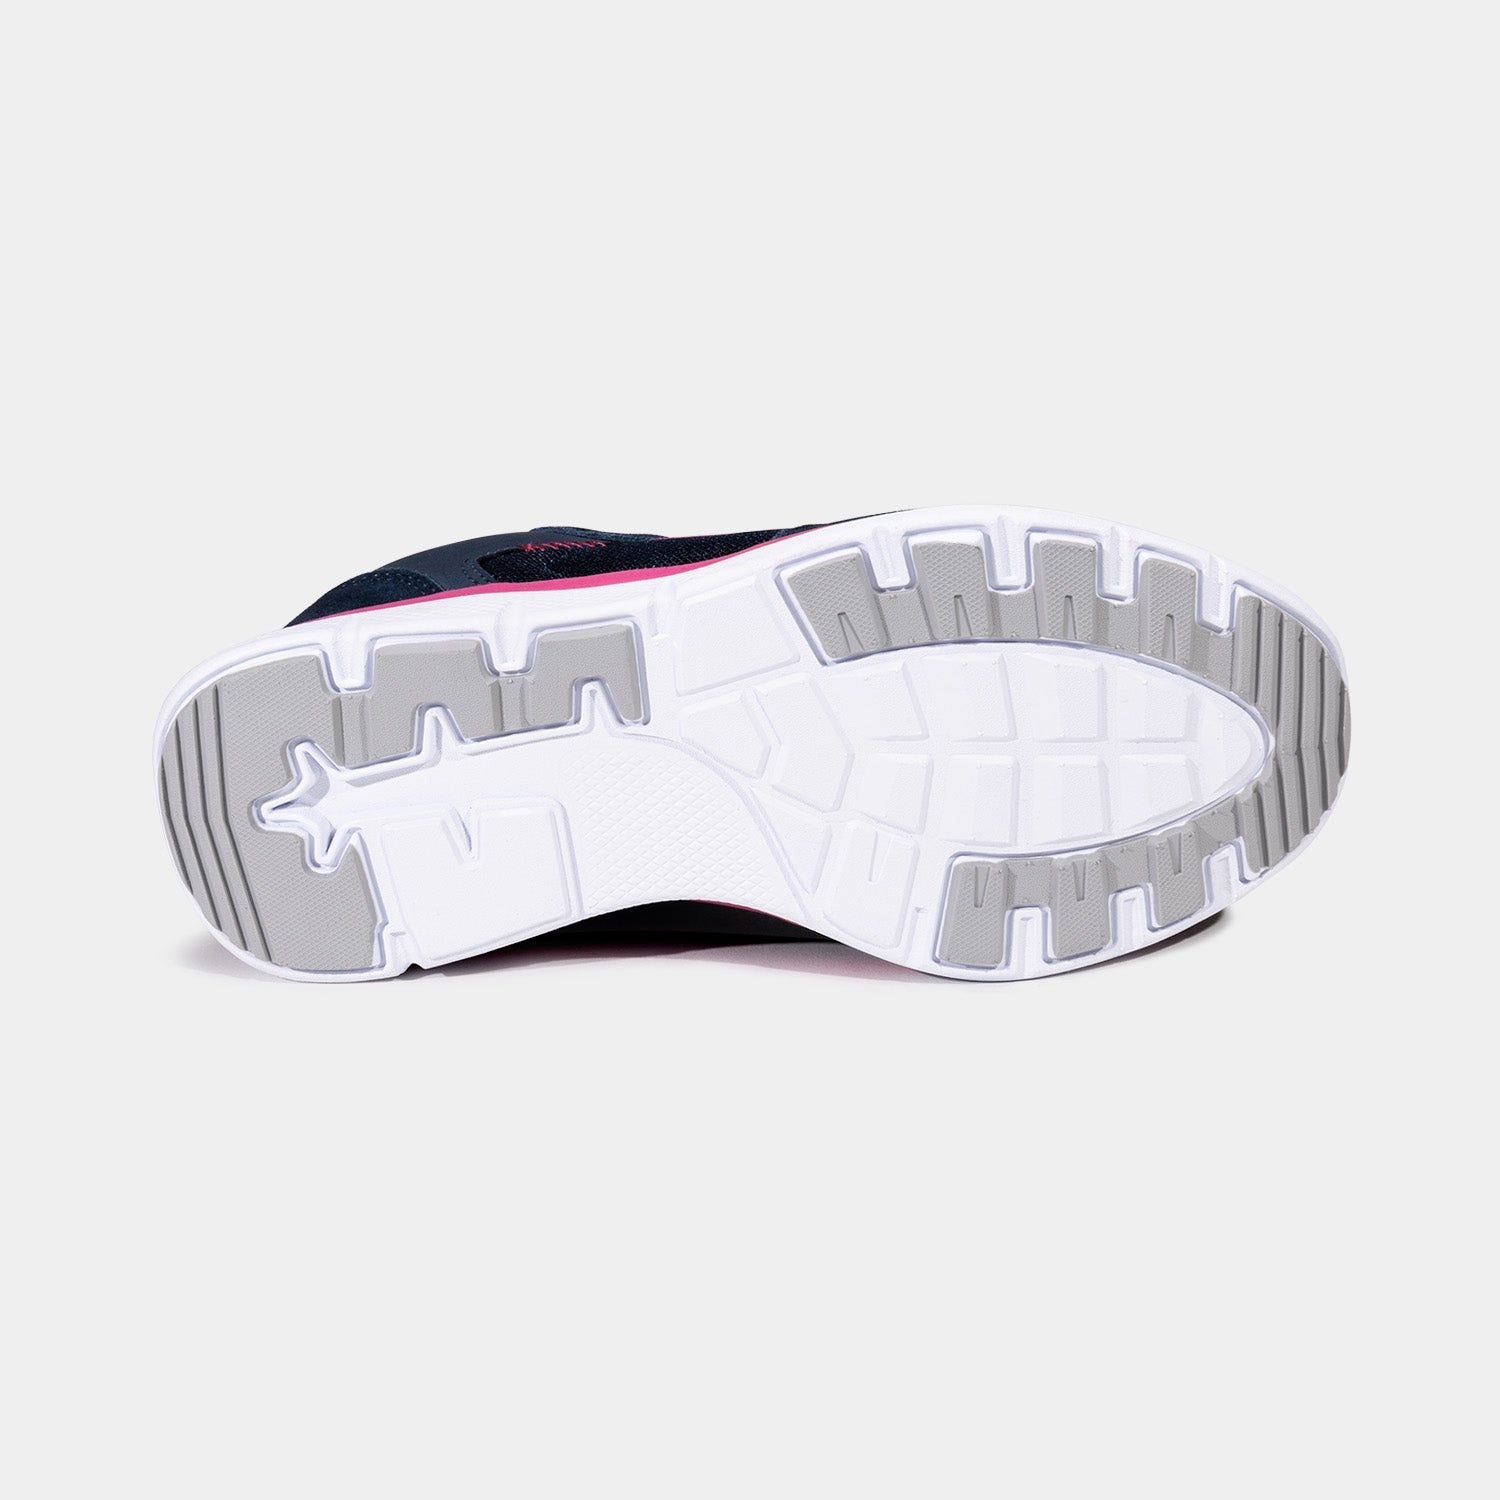 Bottom of navy women's shoe with white anti slip soles and traction patterns.